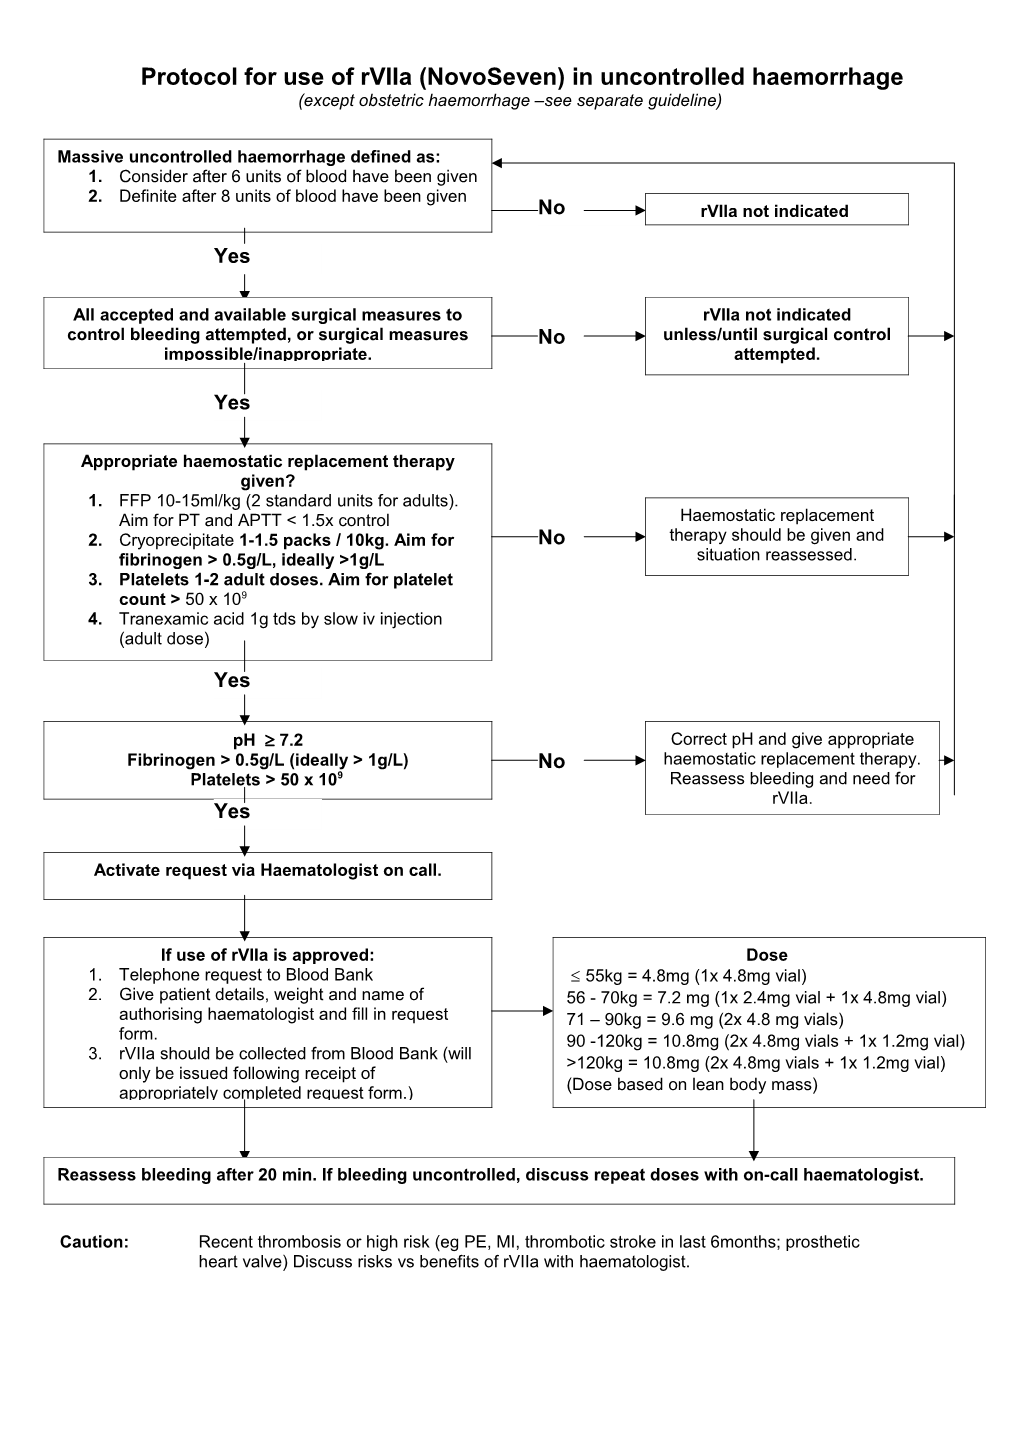 Protocol for Use of Rviia (Novoseven) in Uncontrolled Haemorrhage